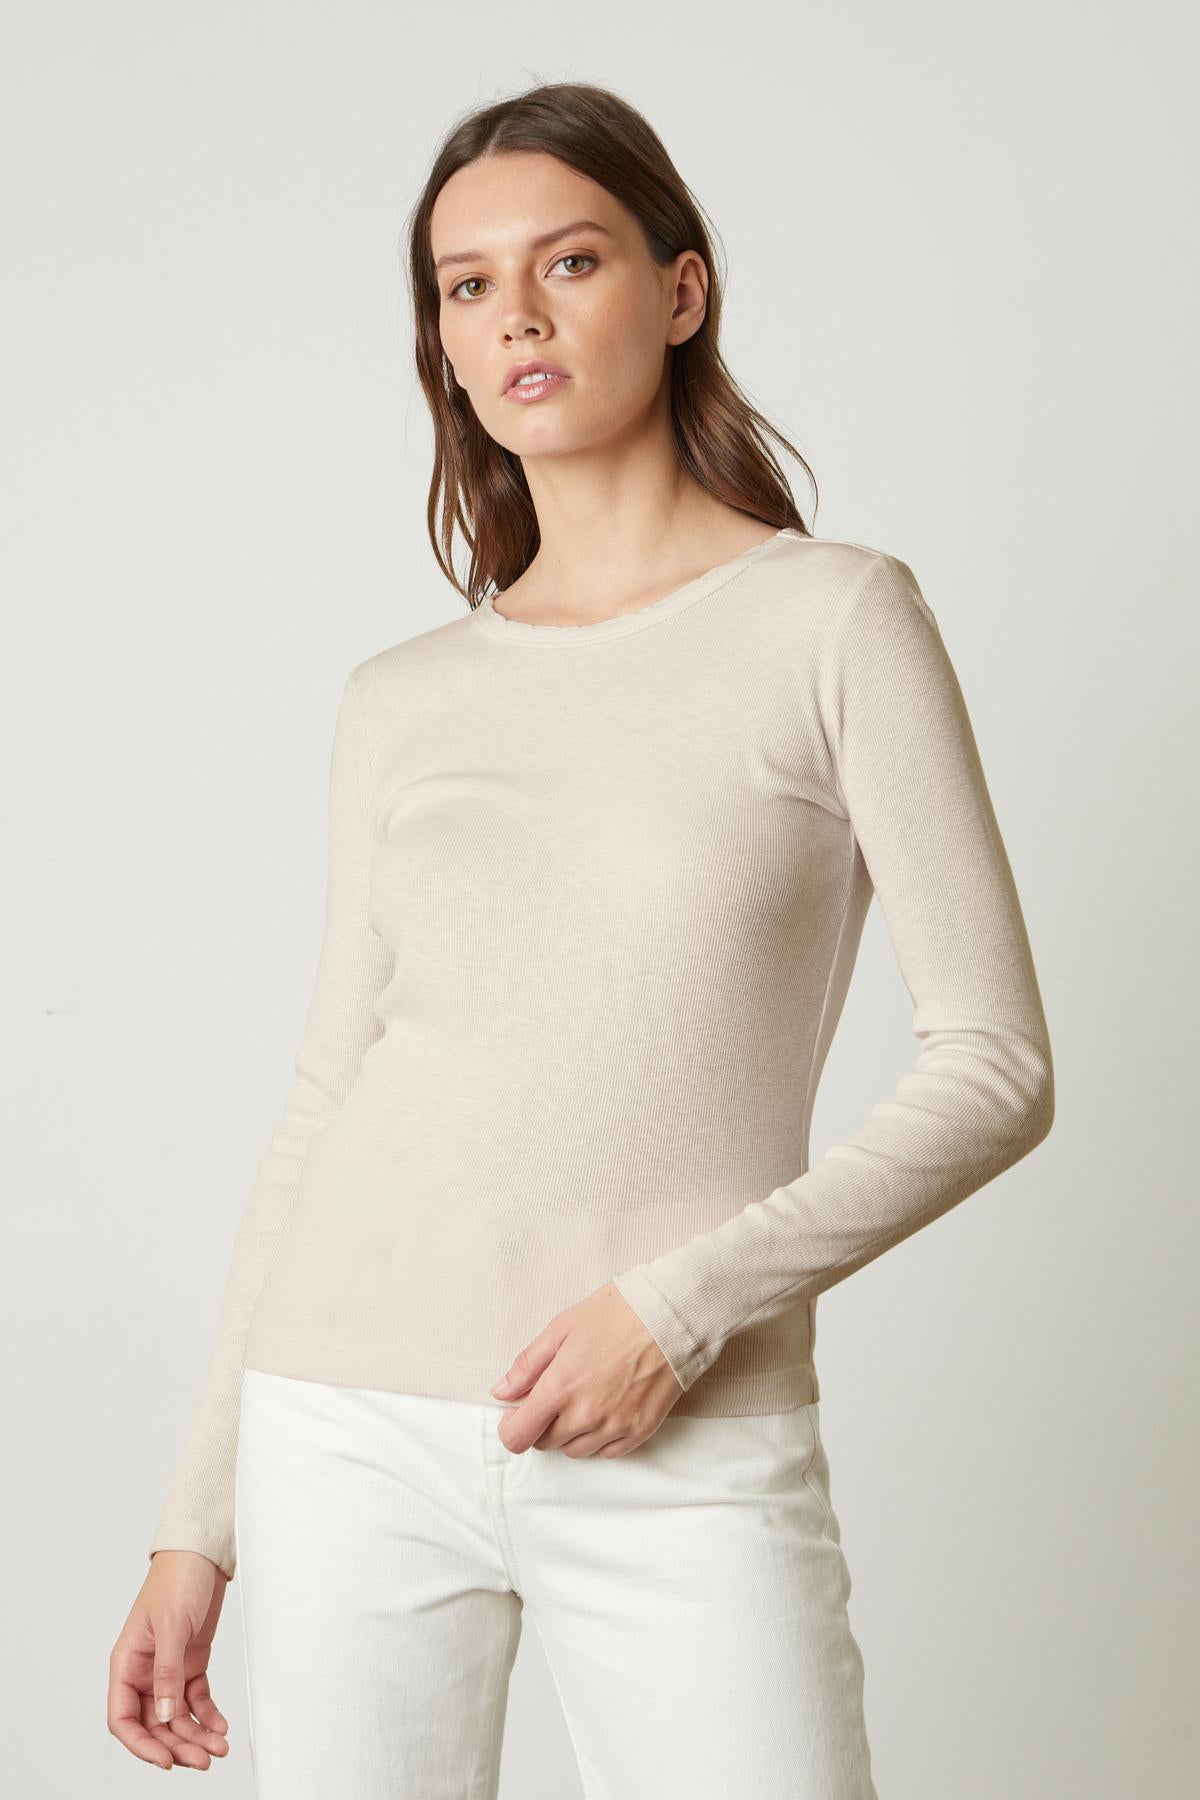   The model is wearing a rib-knit beige sweater and white jeans, perfect for layering over a Velvet by Graham & Spencer BAYLER RIBBED SCOOP NECK TEE. 